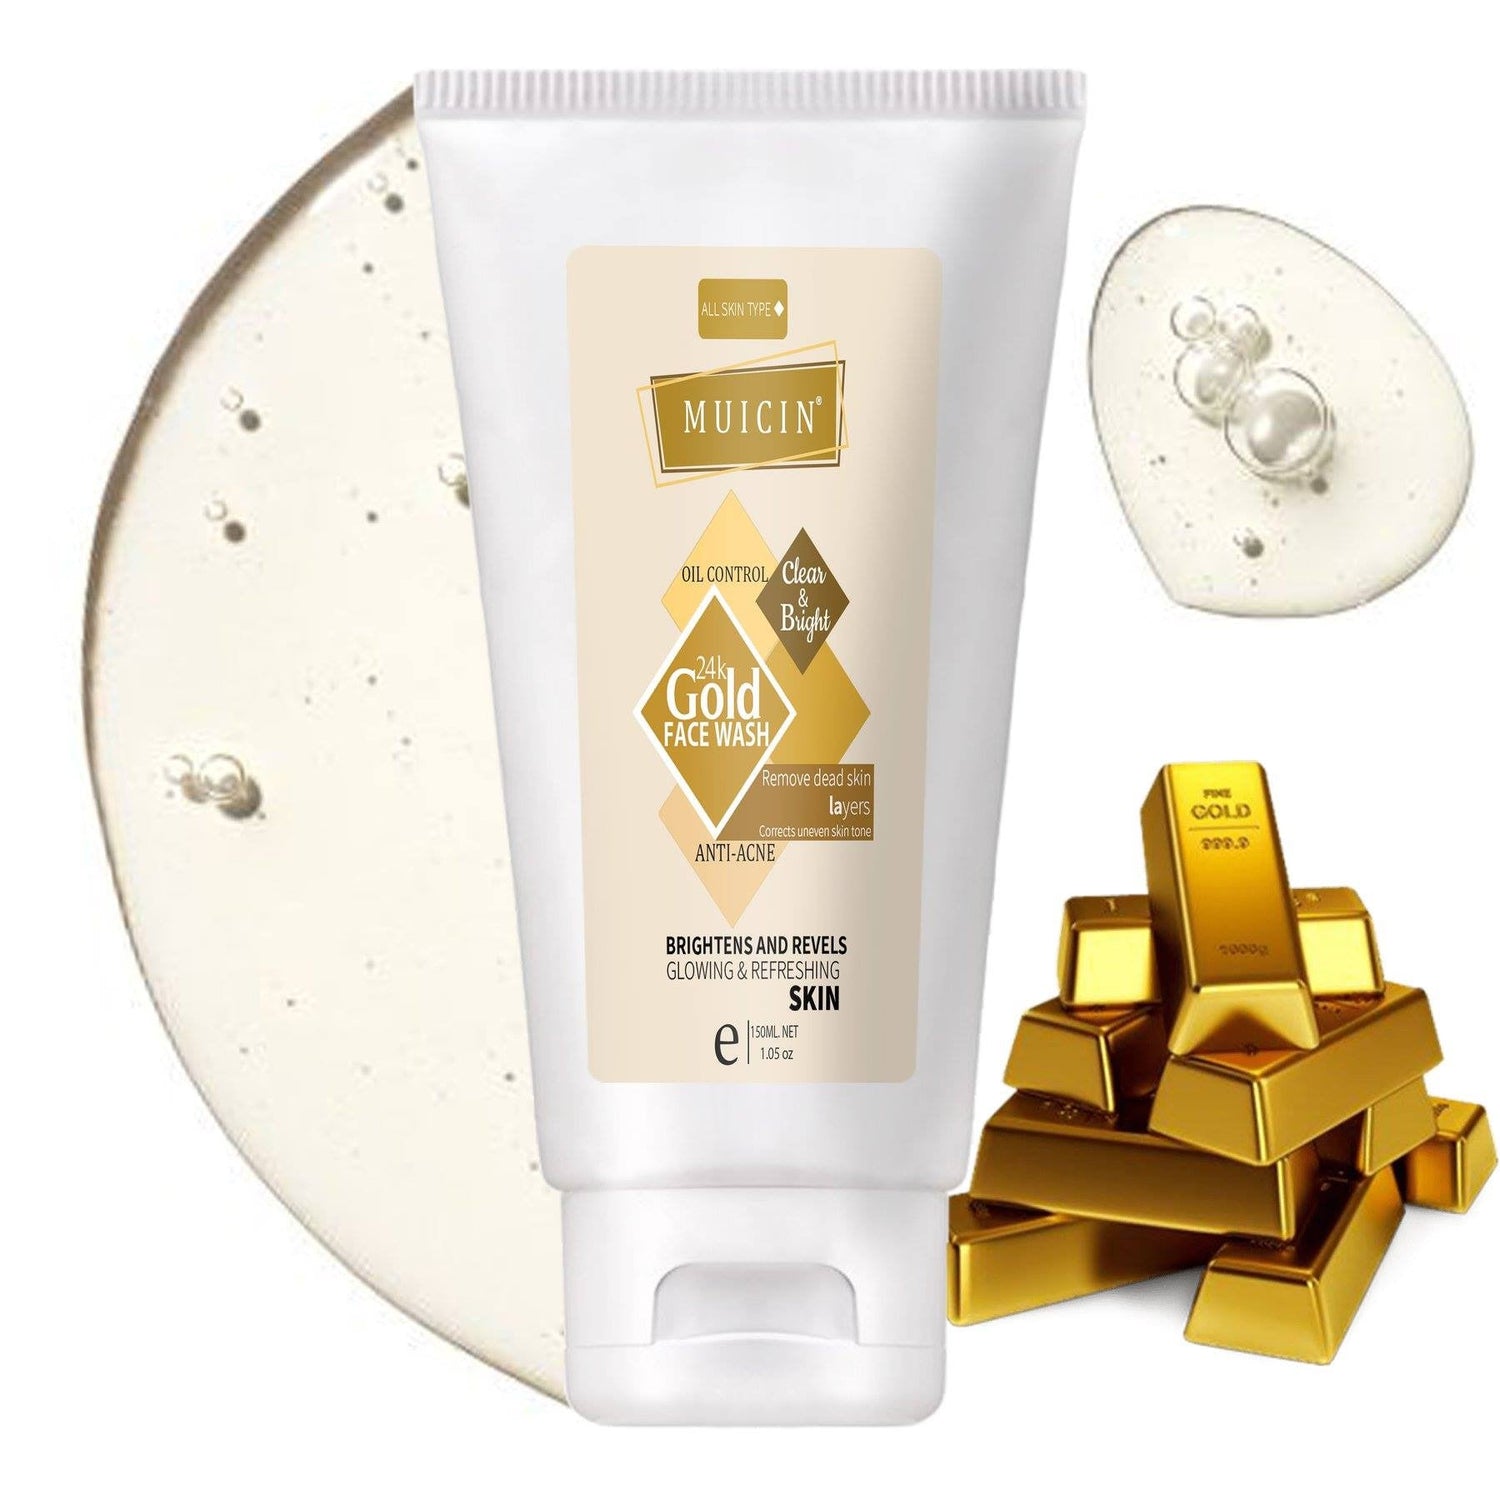 24K GOLD FACE WASH - LUXURIOUS PURIFYING CLEANSE